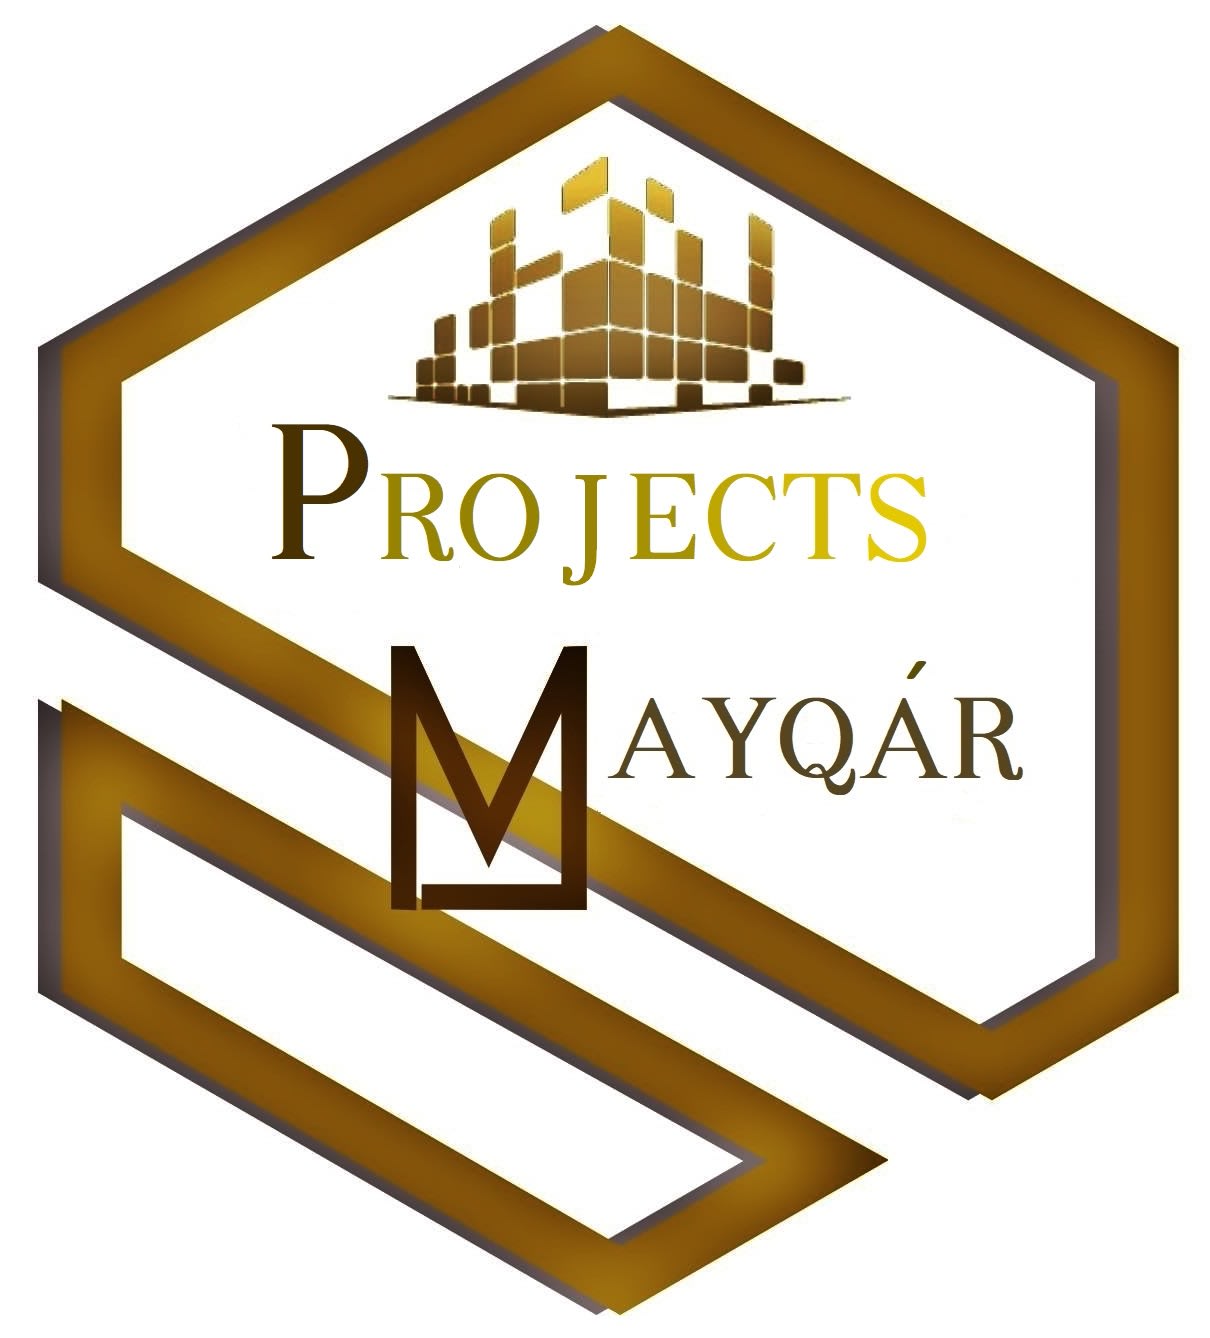 MAYQÁR Projects